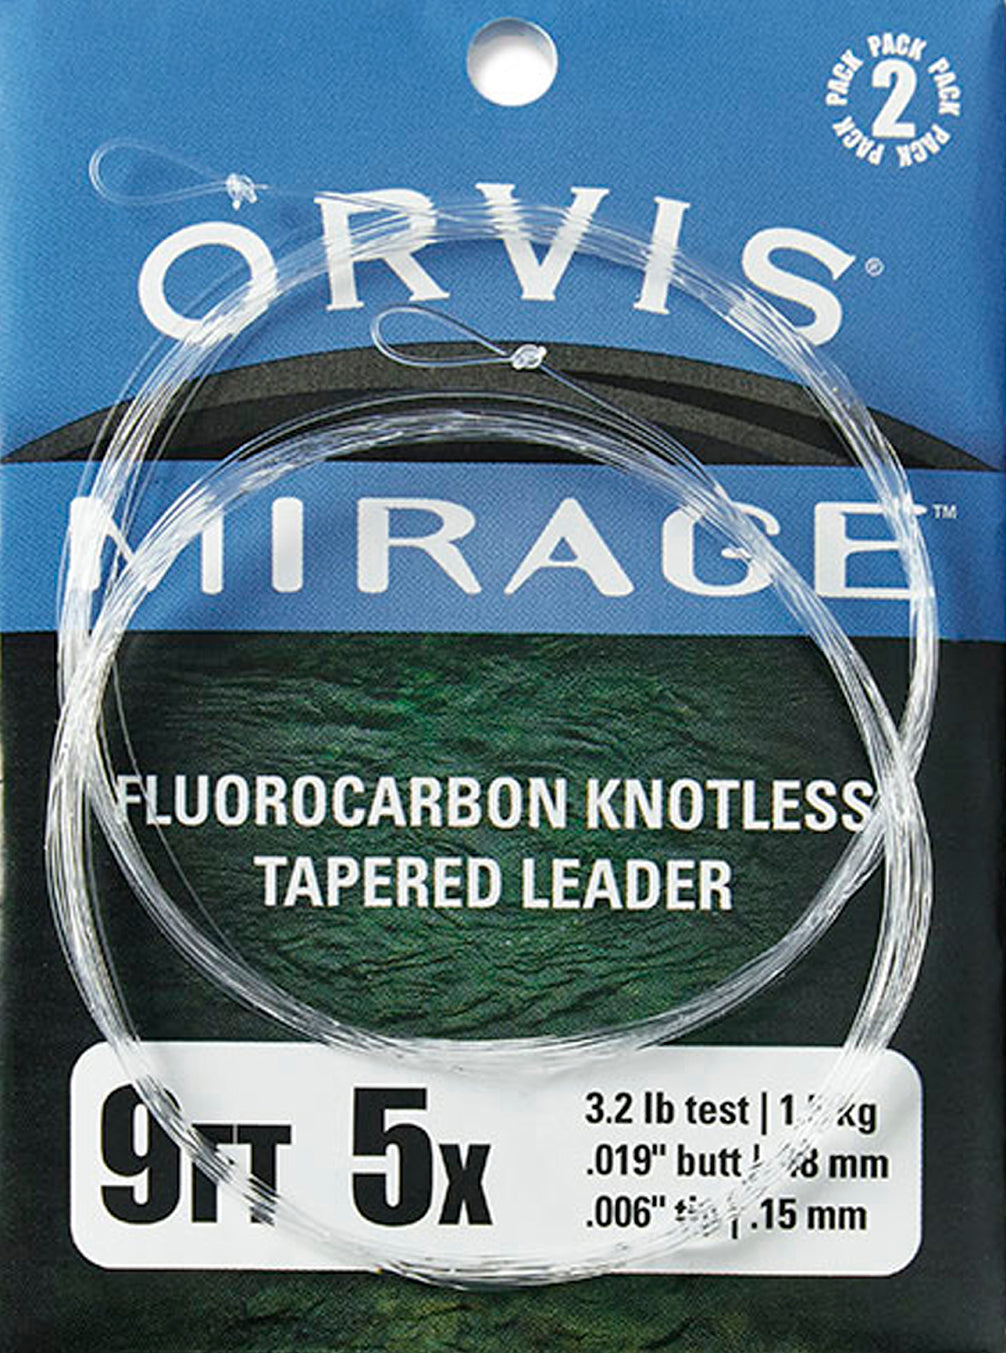 Orvis Mirage Fluoracarbon Trout Knotless 9' Leader (2 pack)